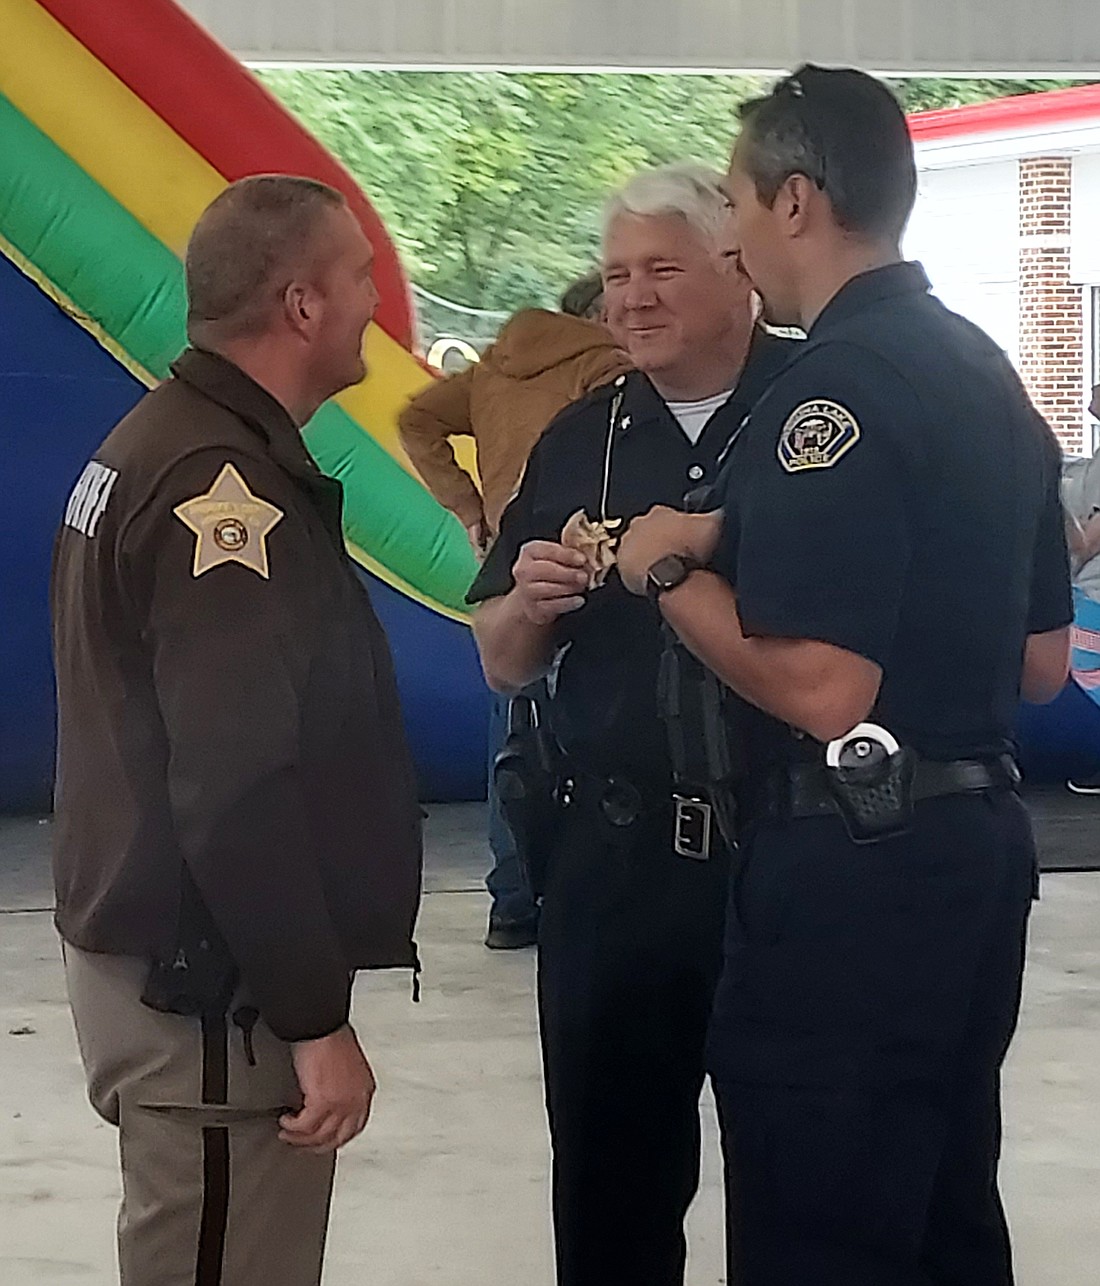 (L to R) Kosciusko County Sheriff’s Office Public Information Officer Sgt. Doug Light, Winona Lake Town Marshal Joe Hawn and Phillip Hawks, school resource officer at Lakeland Christian Academy, talk at the Faith & Blue event Saturday at the Miller Sunset Pavilion. Photo by Jackie Gorski, Times-Union